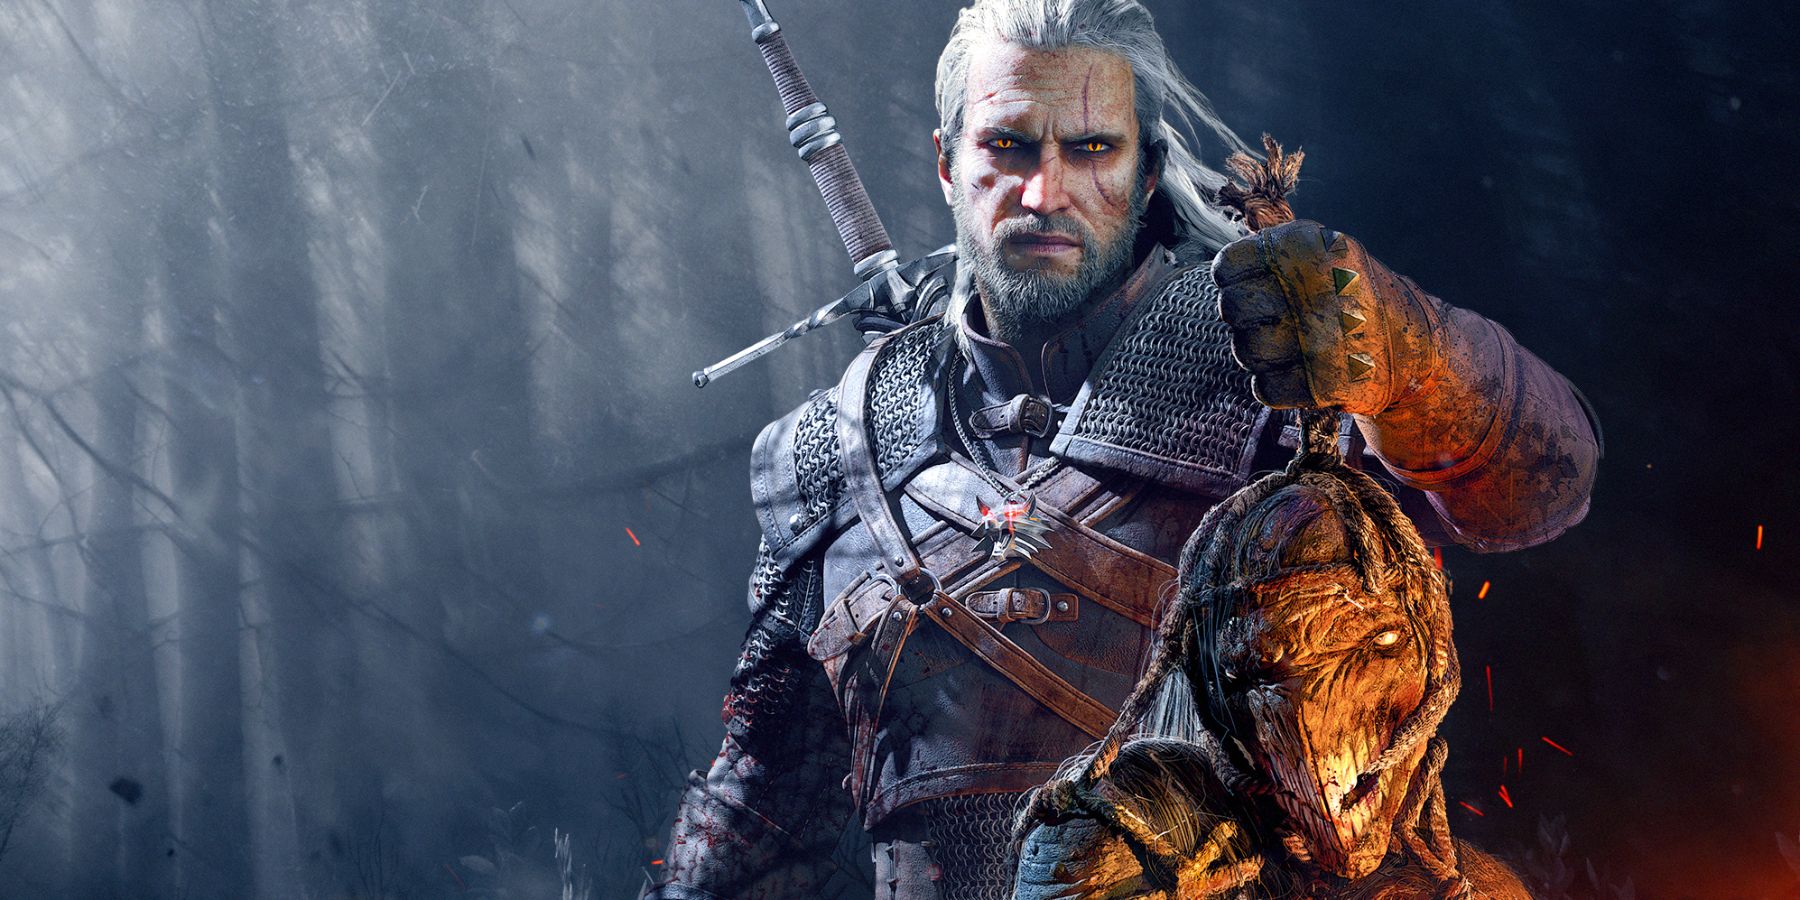 Geralt the Witcher holding the heads of monsters, tied together into a trophy after being slain.